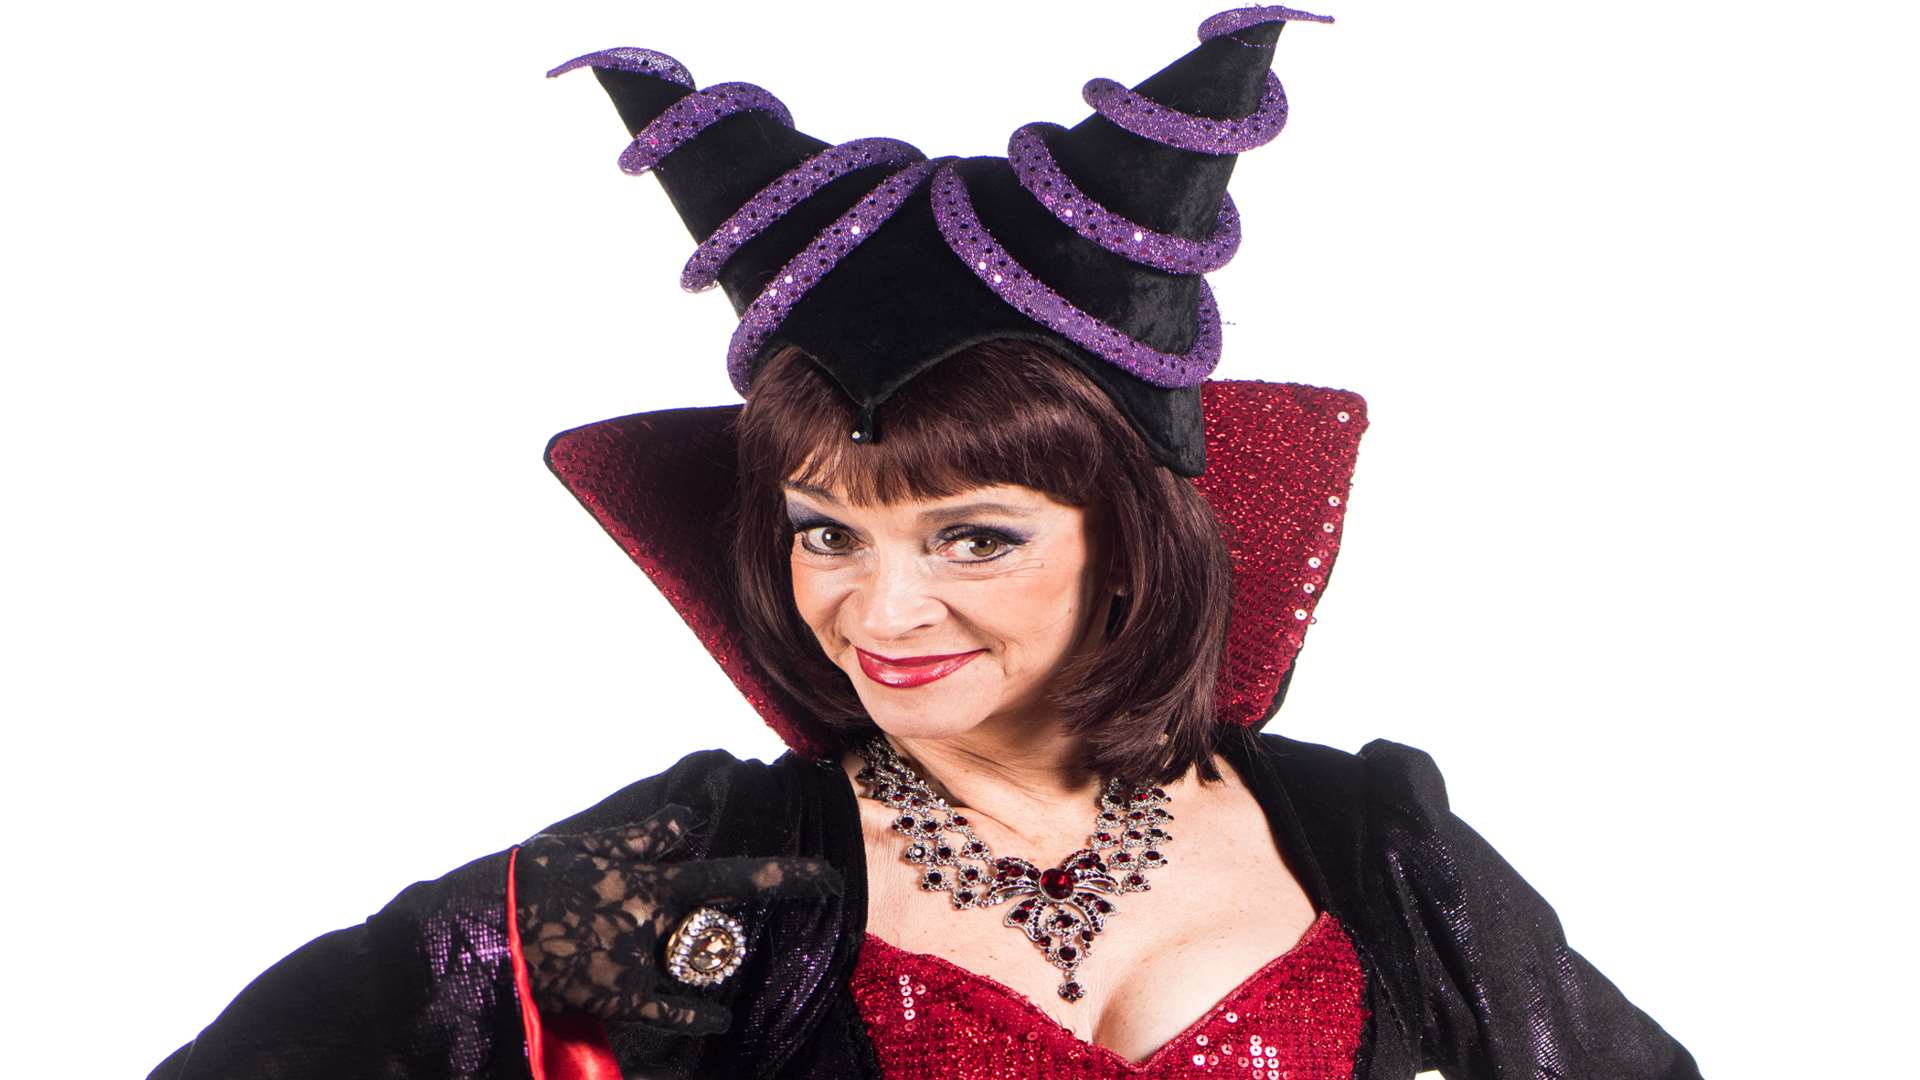 Only Fools and Horses star Sue Holderness will be appearing in this year's Christmas panto, Beauty and the Beast.